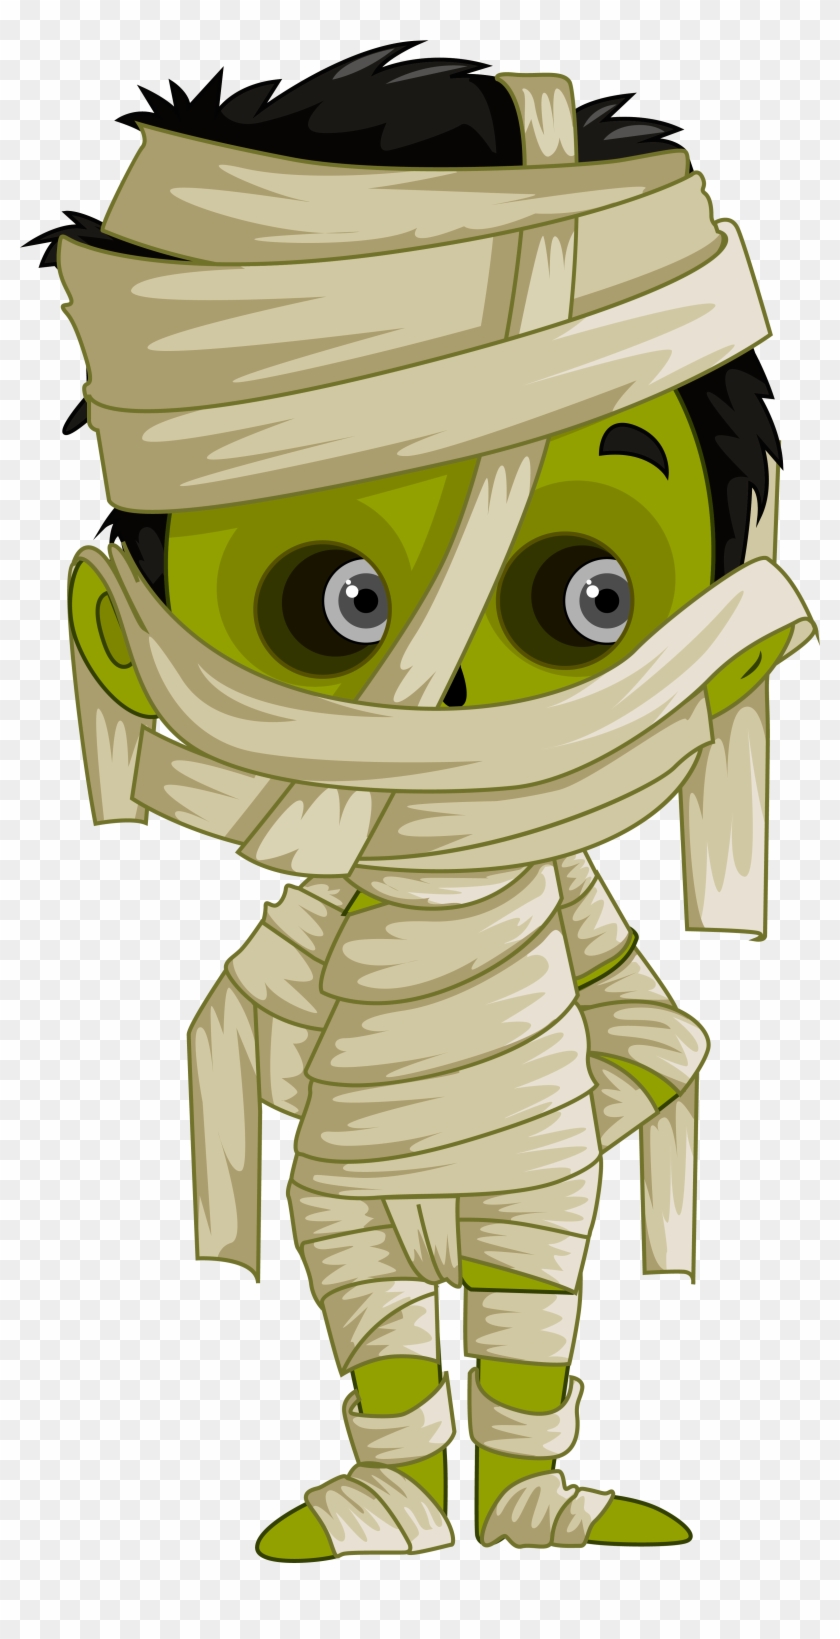 Mummy Png Clipart Image - Mummy Clipart Png Transparent Png #659651